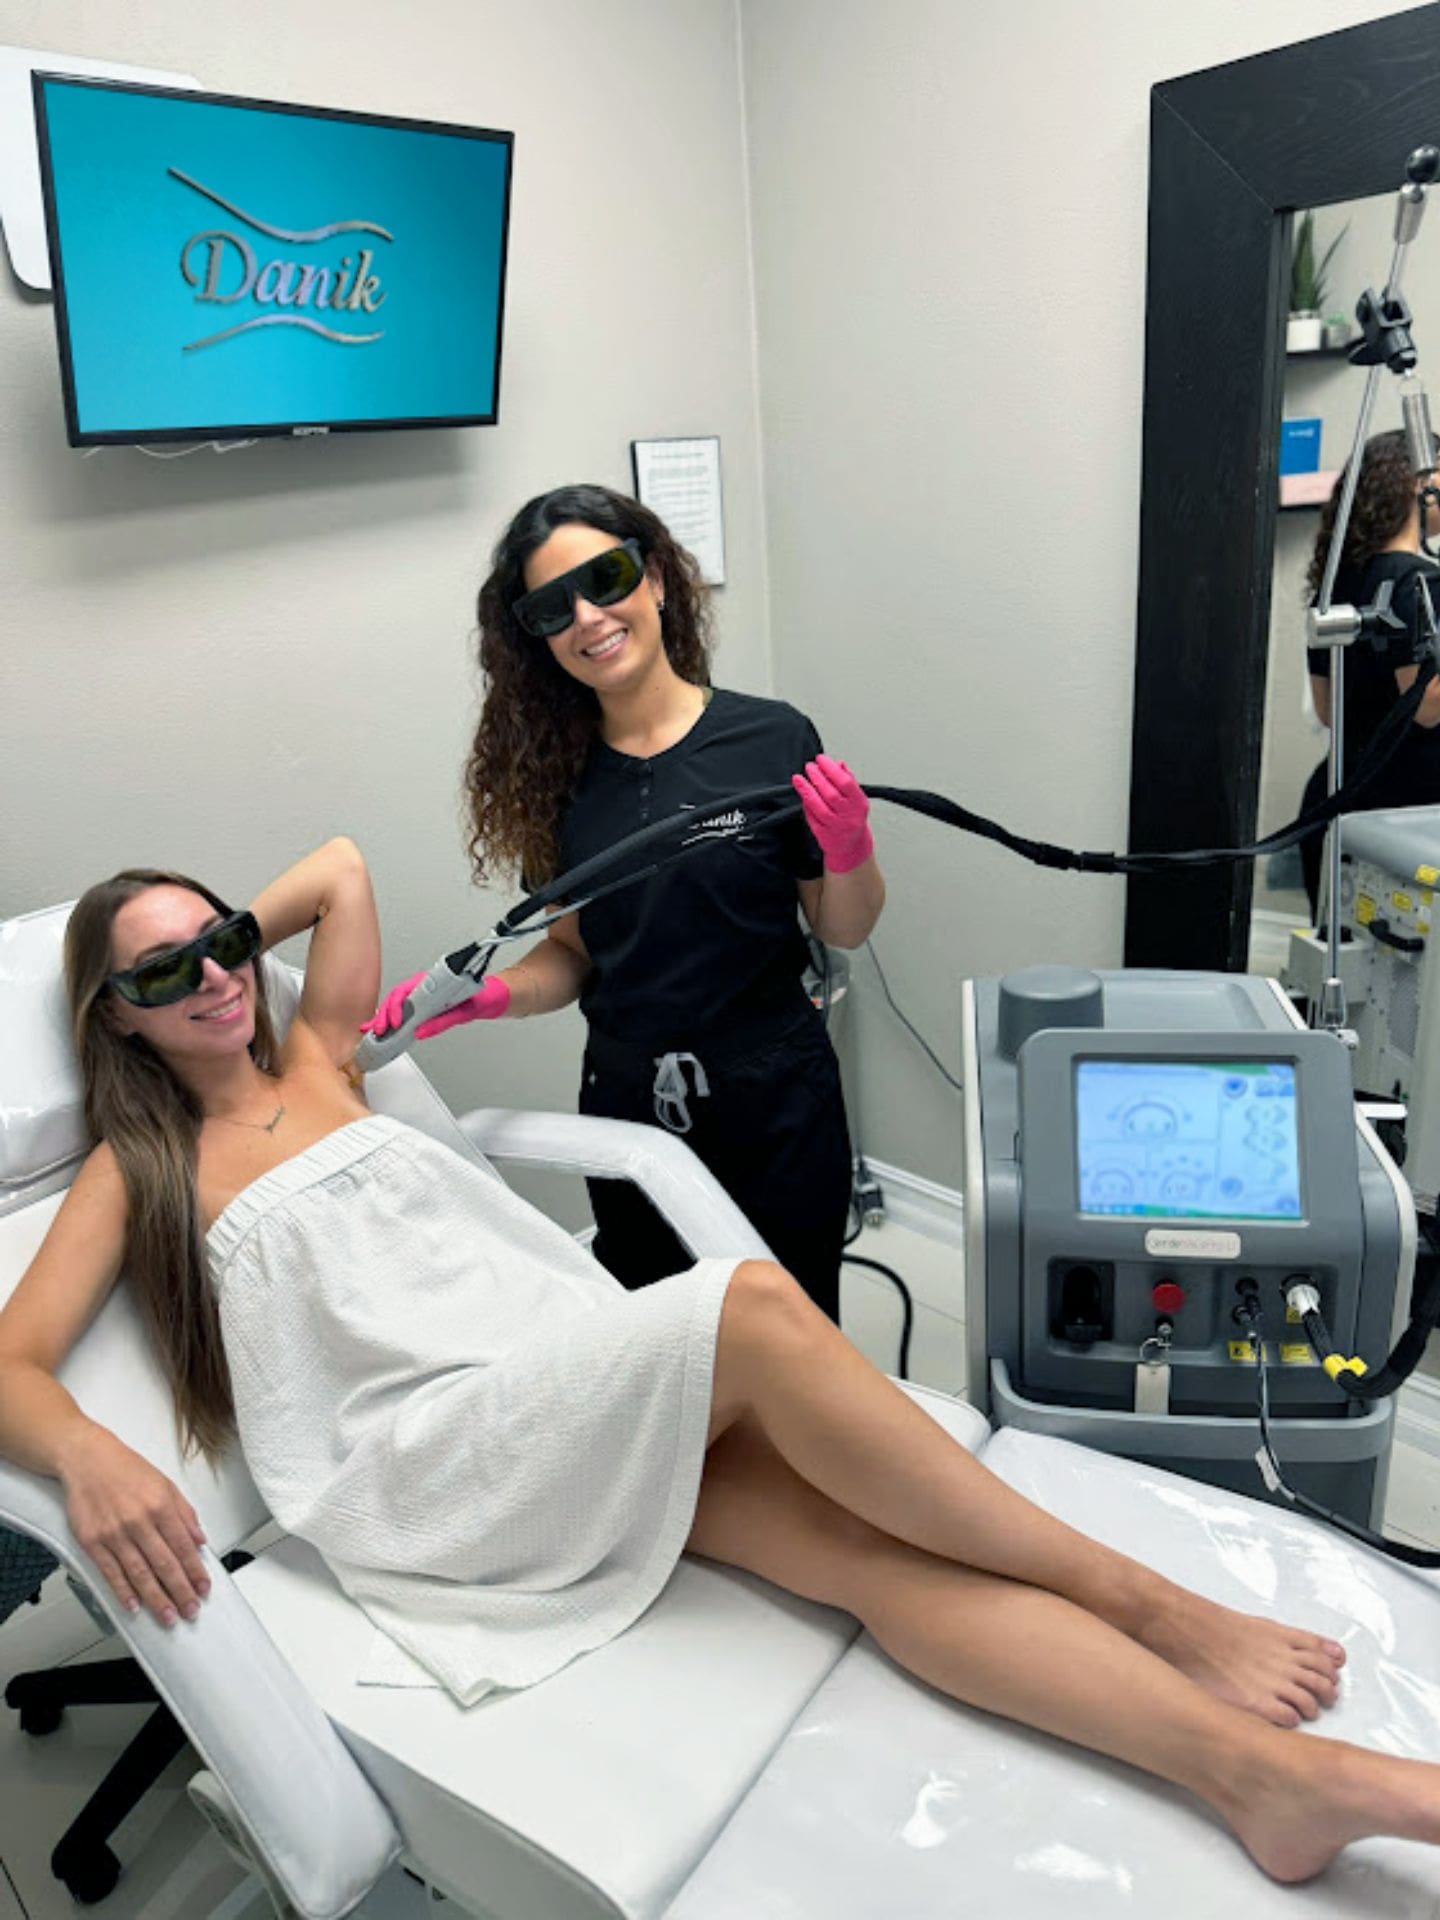 Specialist Wearing Black Uniform And Pink Gloves Applying Best Laser Hair Removal Treatment On A Woman In A White Dress Wearing Protective Glasses